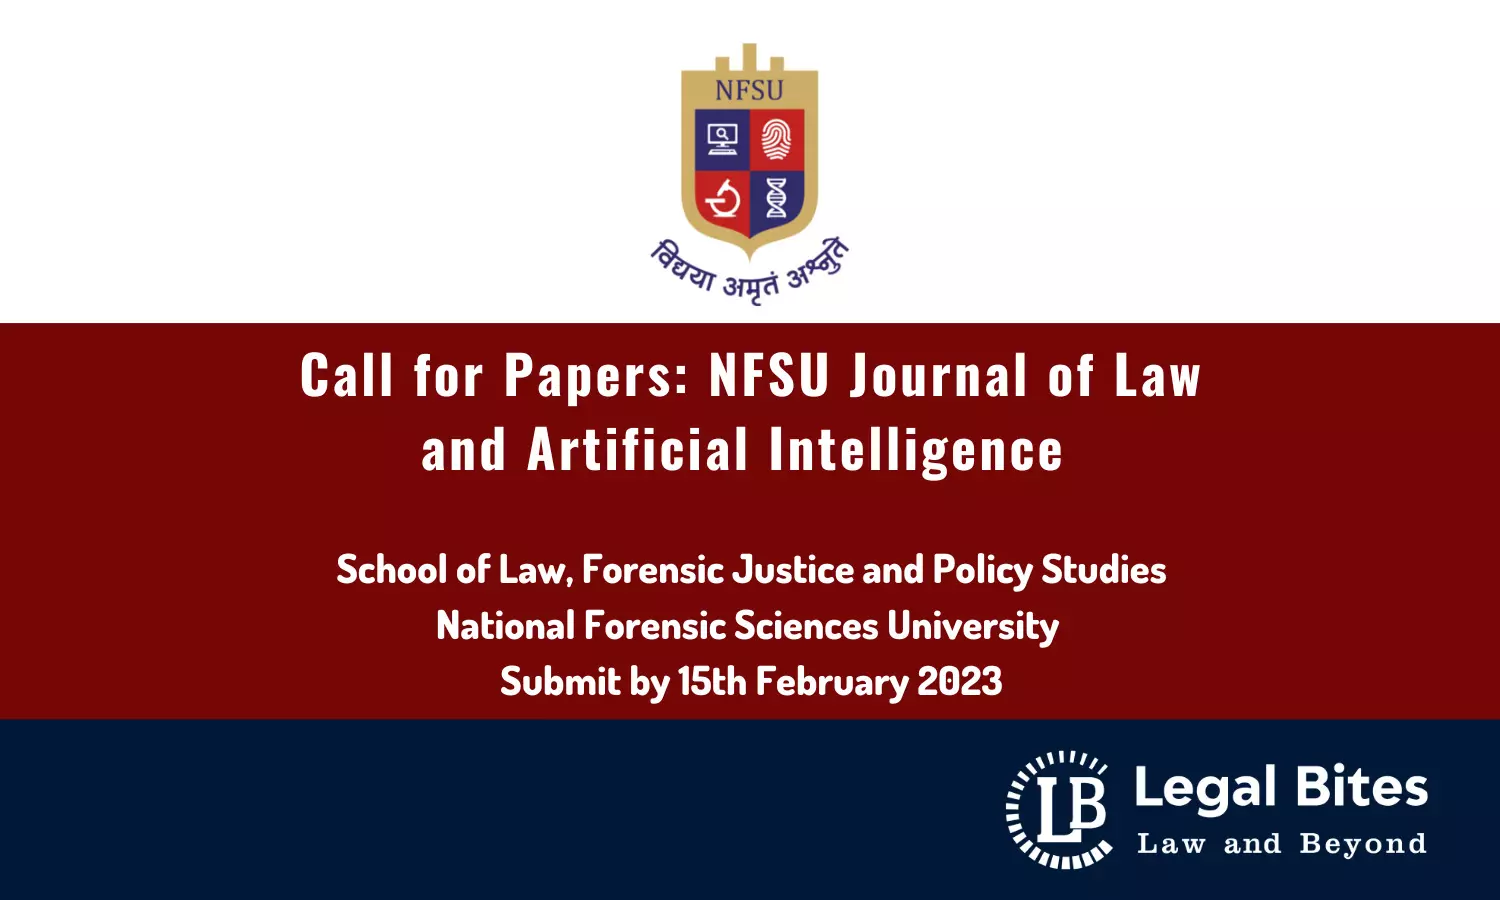 Call for Papers: NFSU Journal of Law and Artificial Intelligence